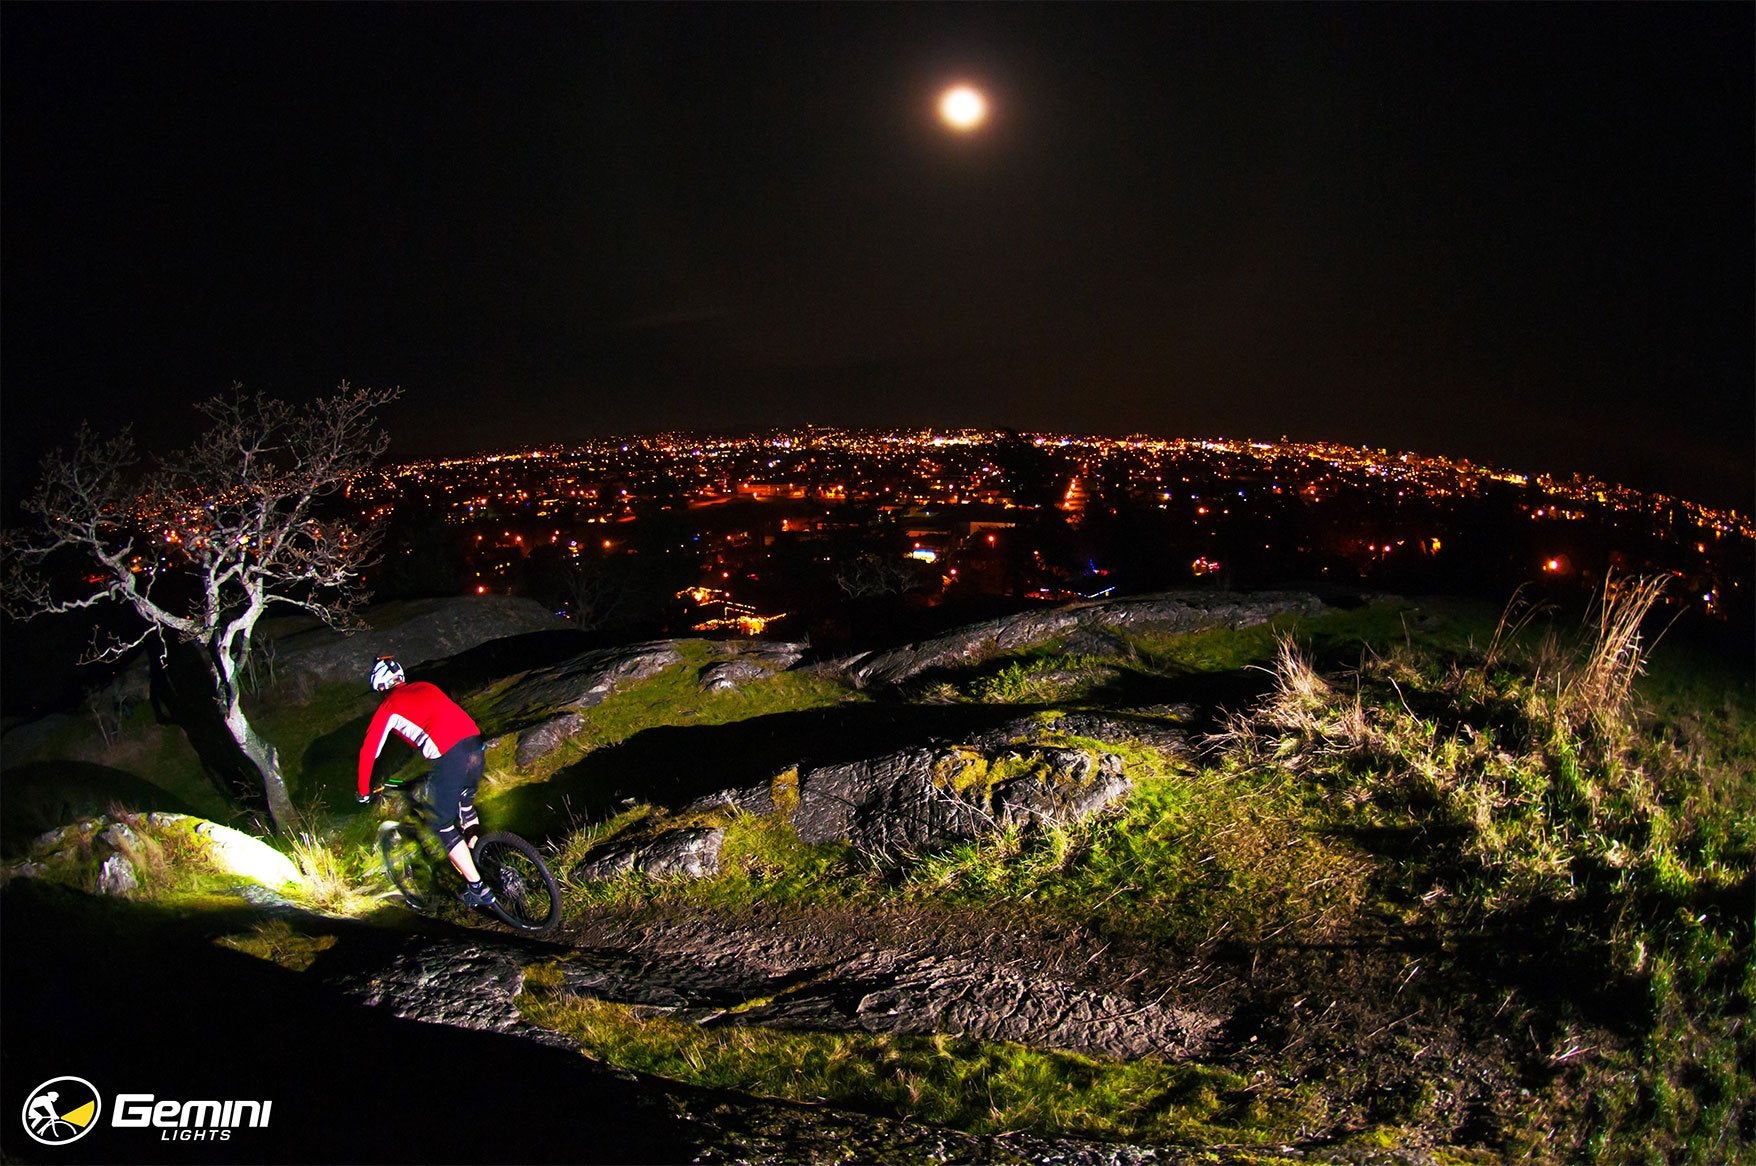 Tips for Night Riding and Choosing the Best Lights